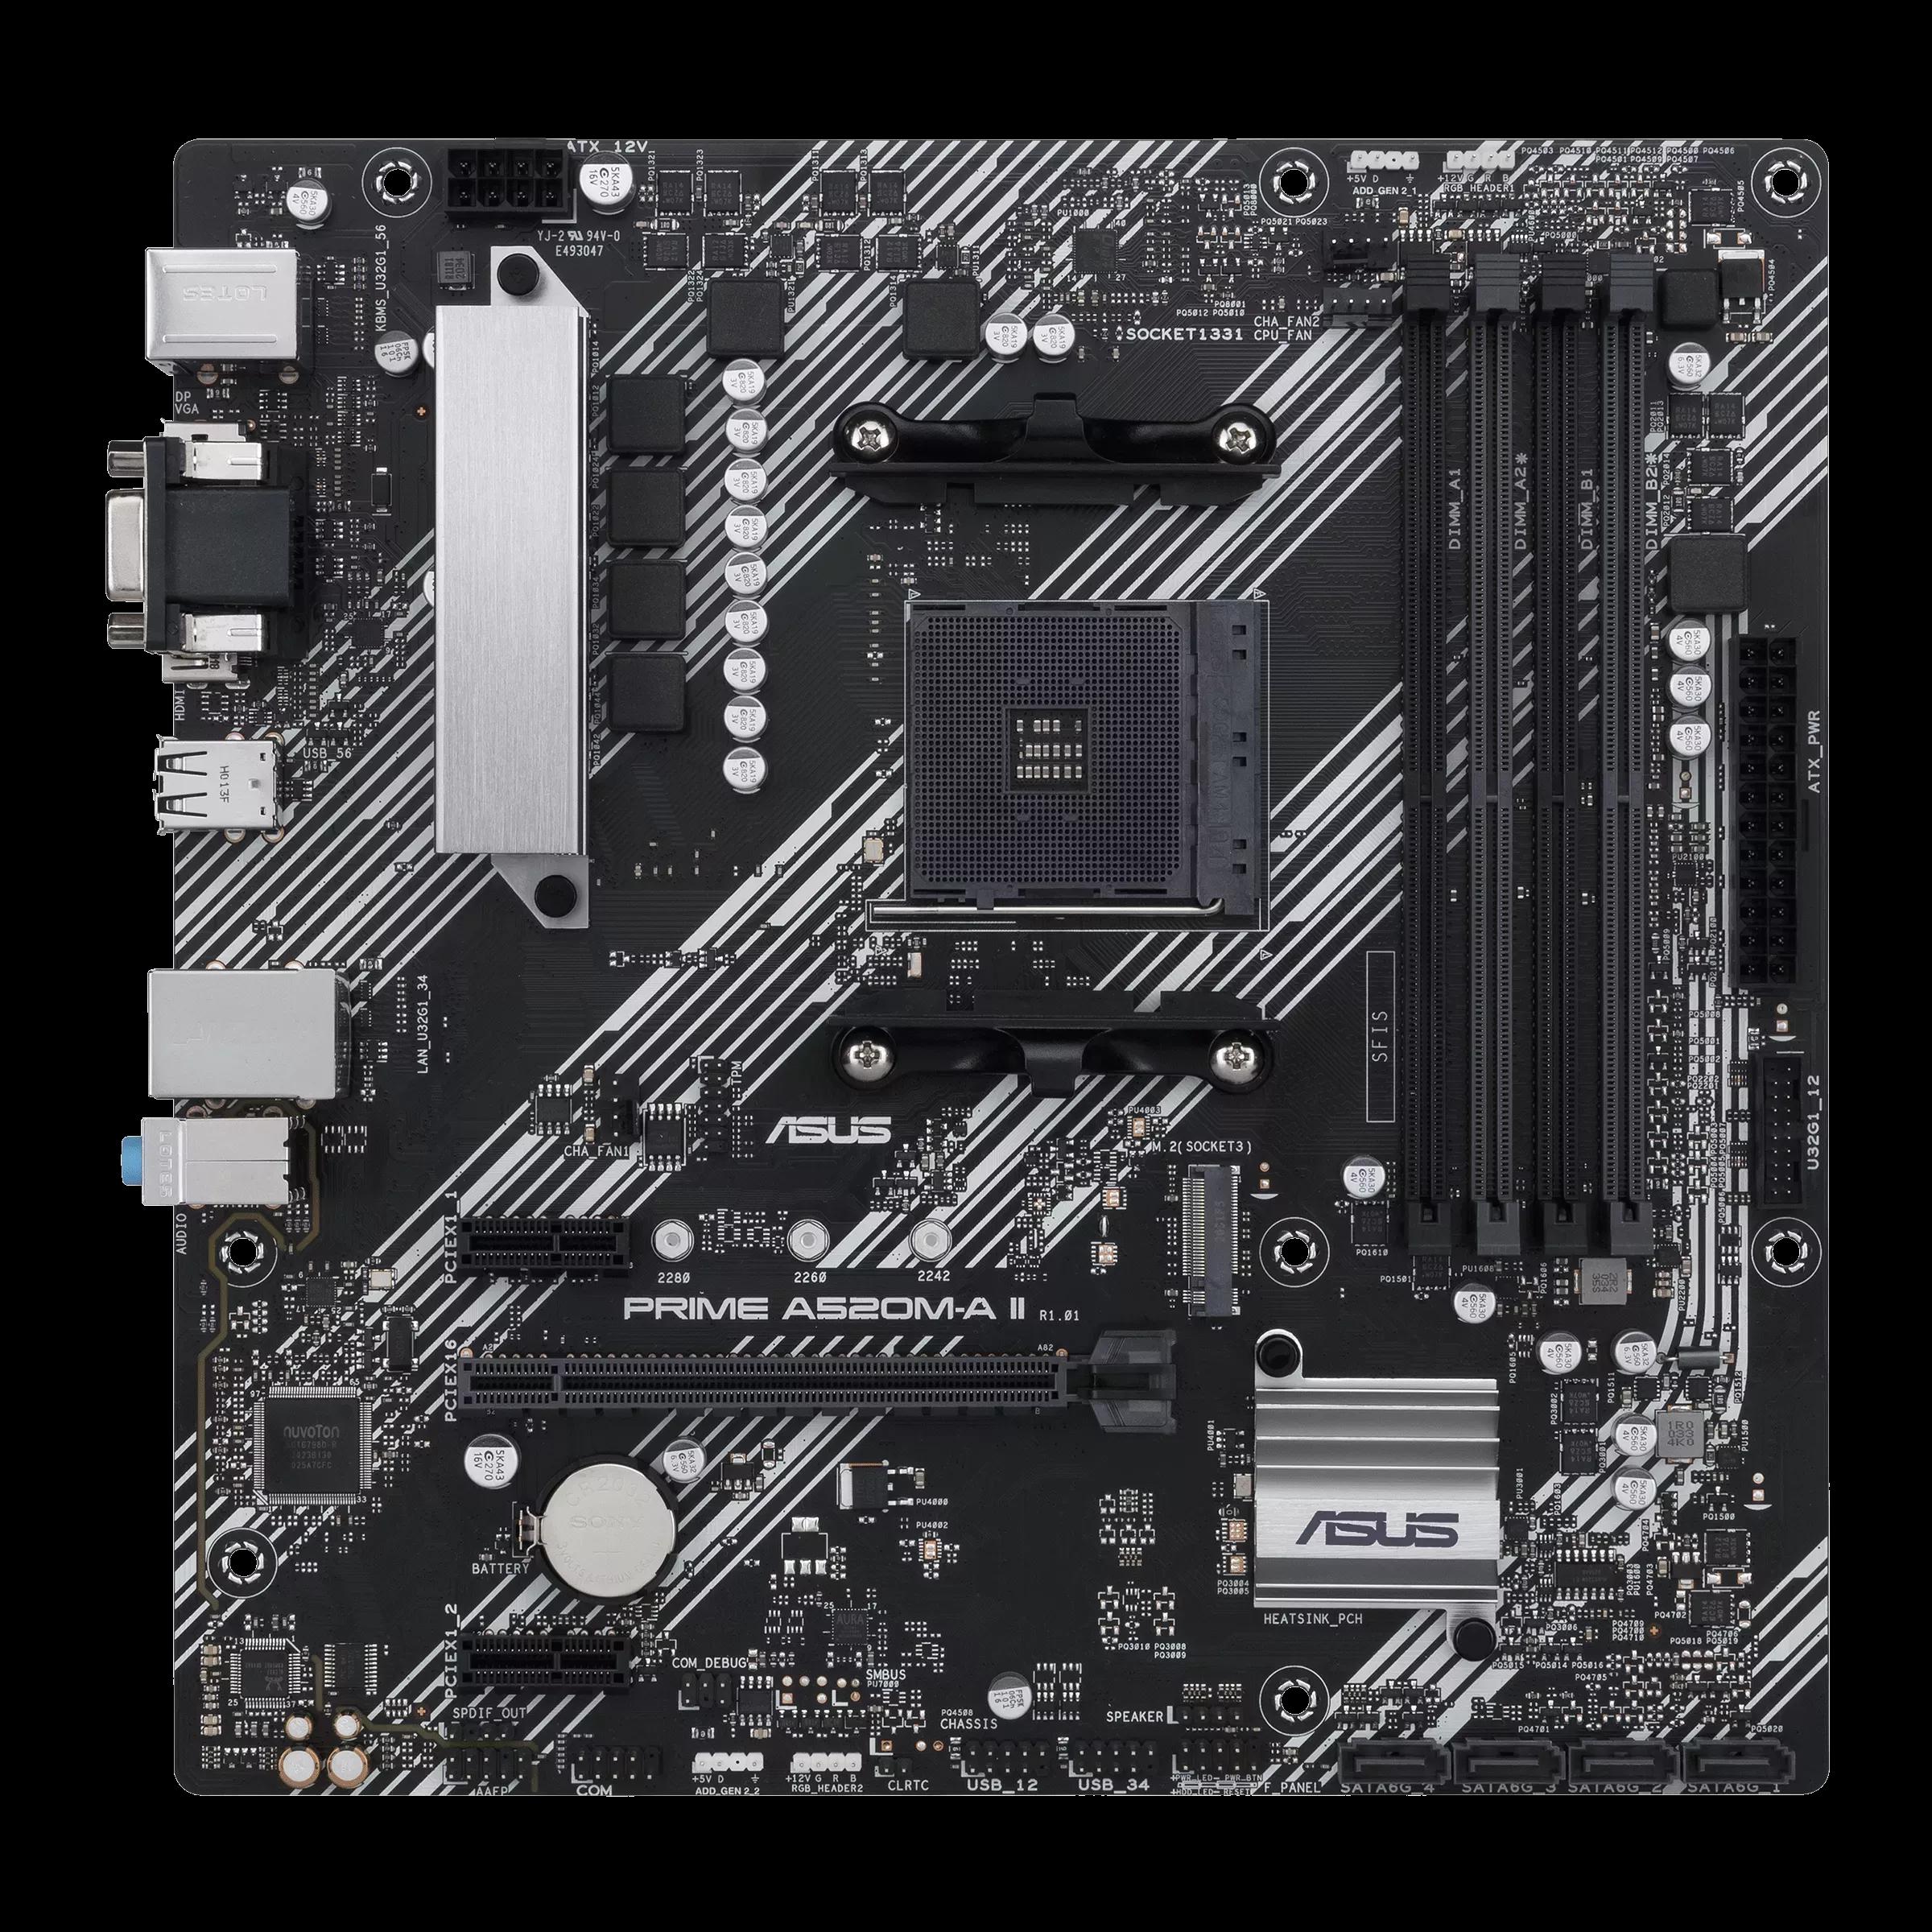 Asus PRIME A520M-A II AM4 micro ATX Motherboard Price Nepal